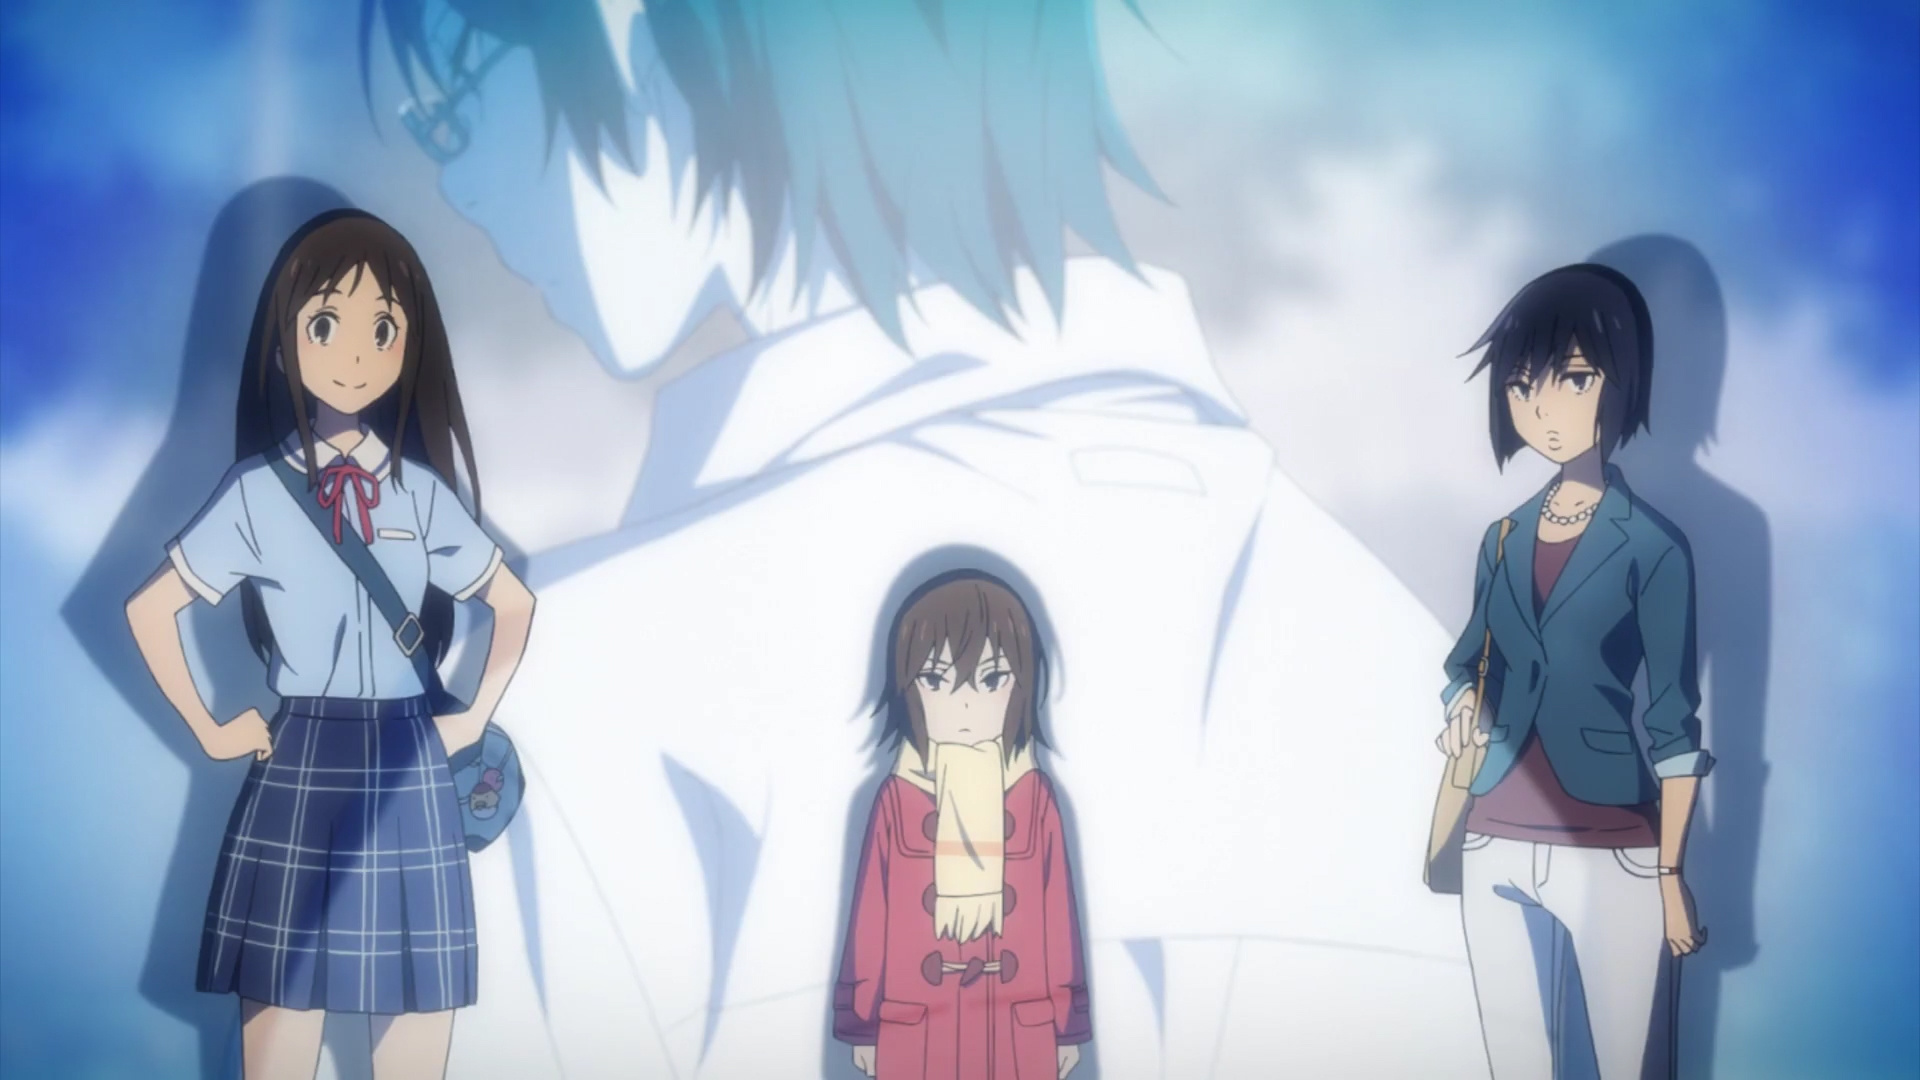 Erased Anime, Vol 1 review, Time travel mystery, Anime and manga, 1920x1080 Full HD Desktop